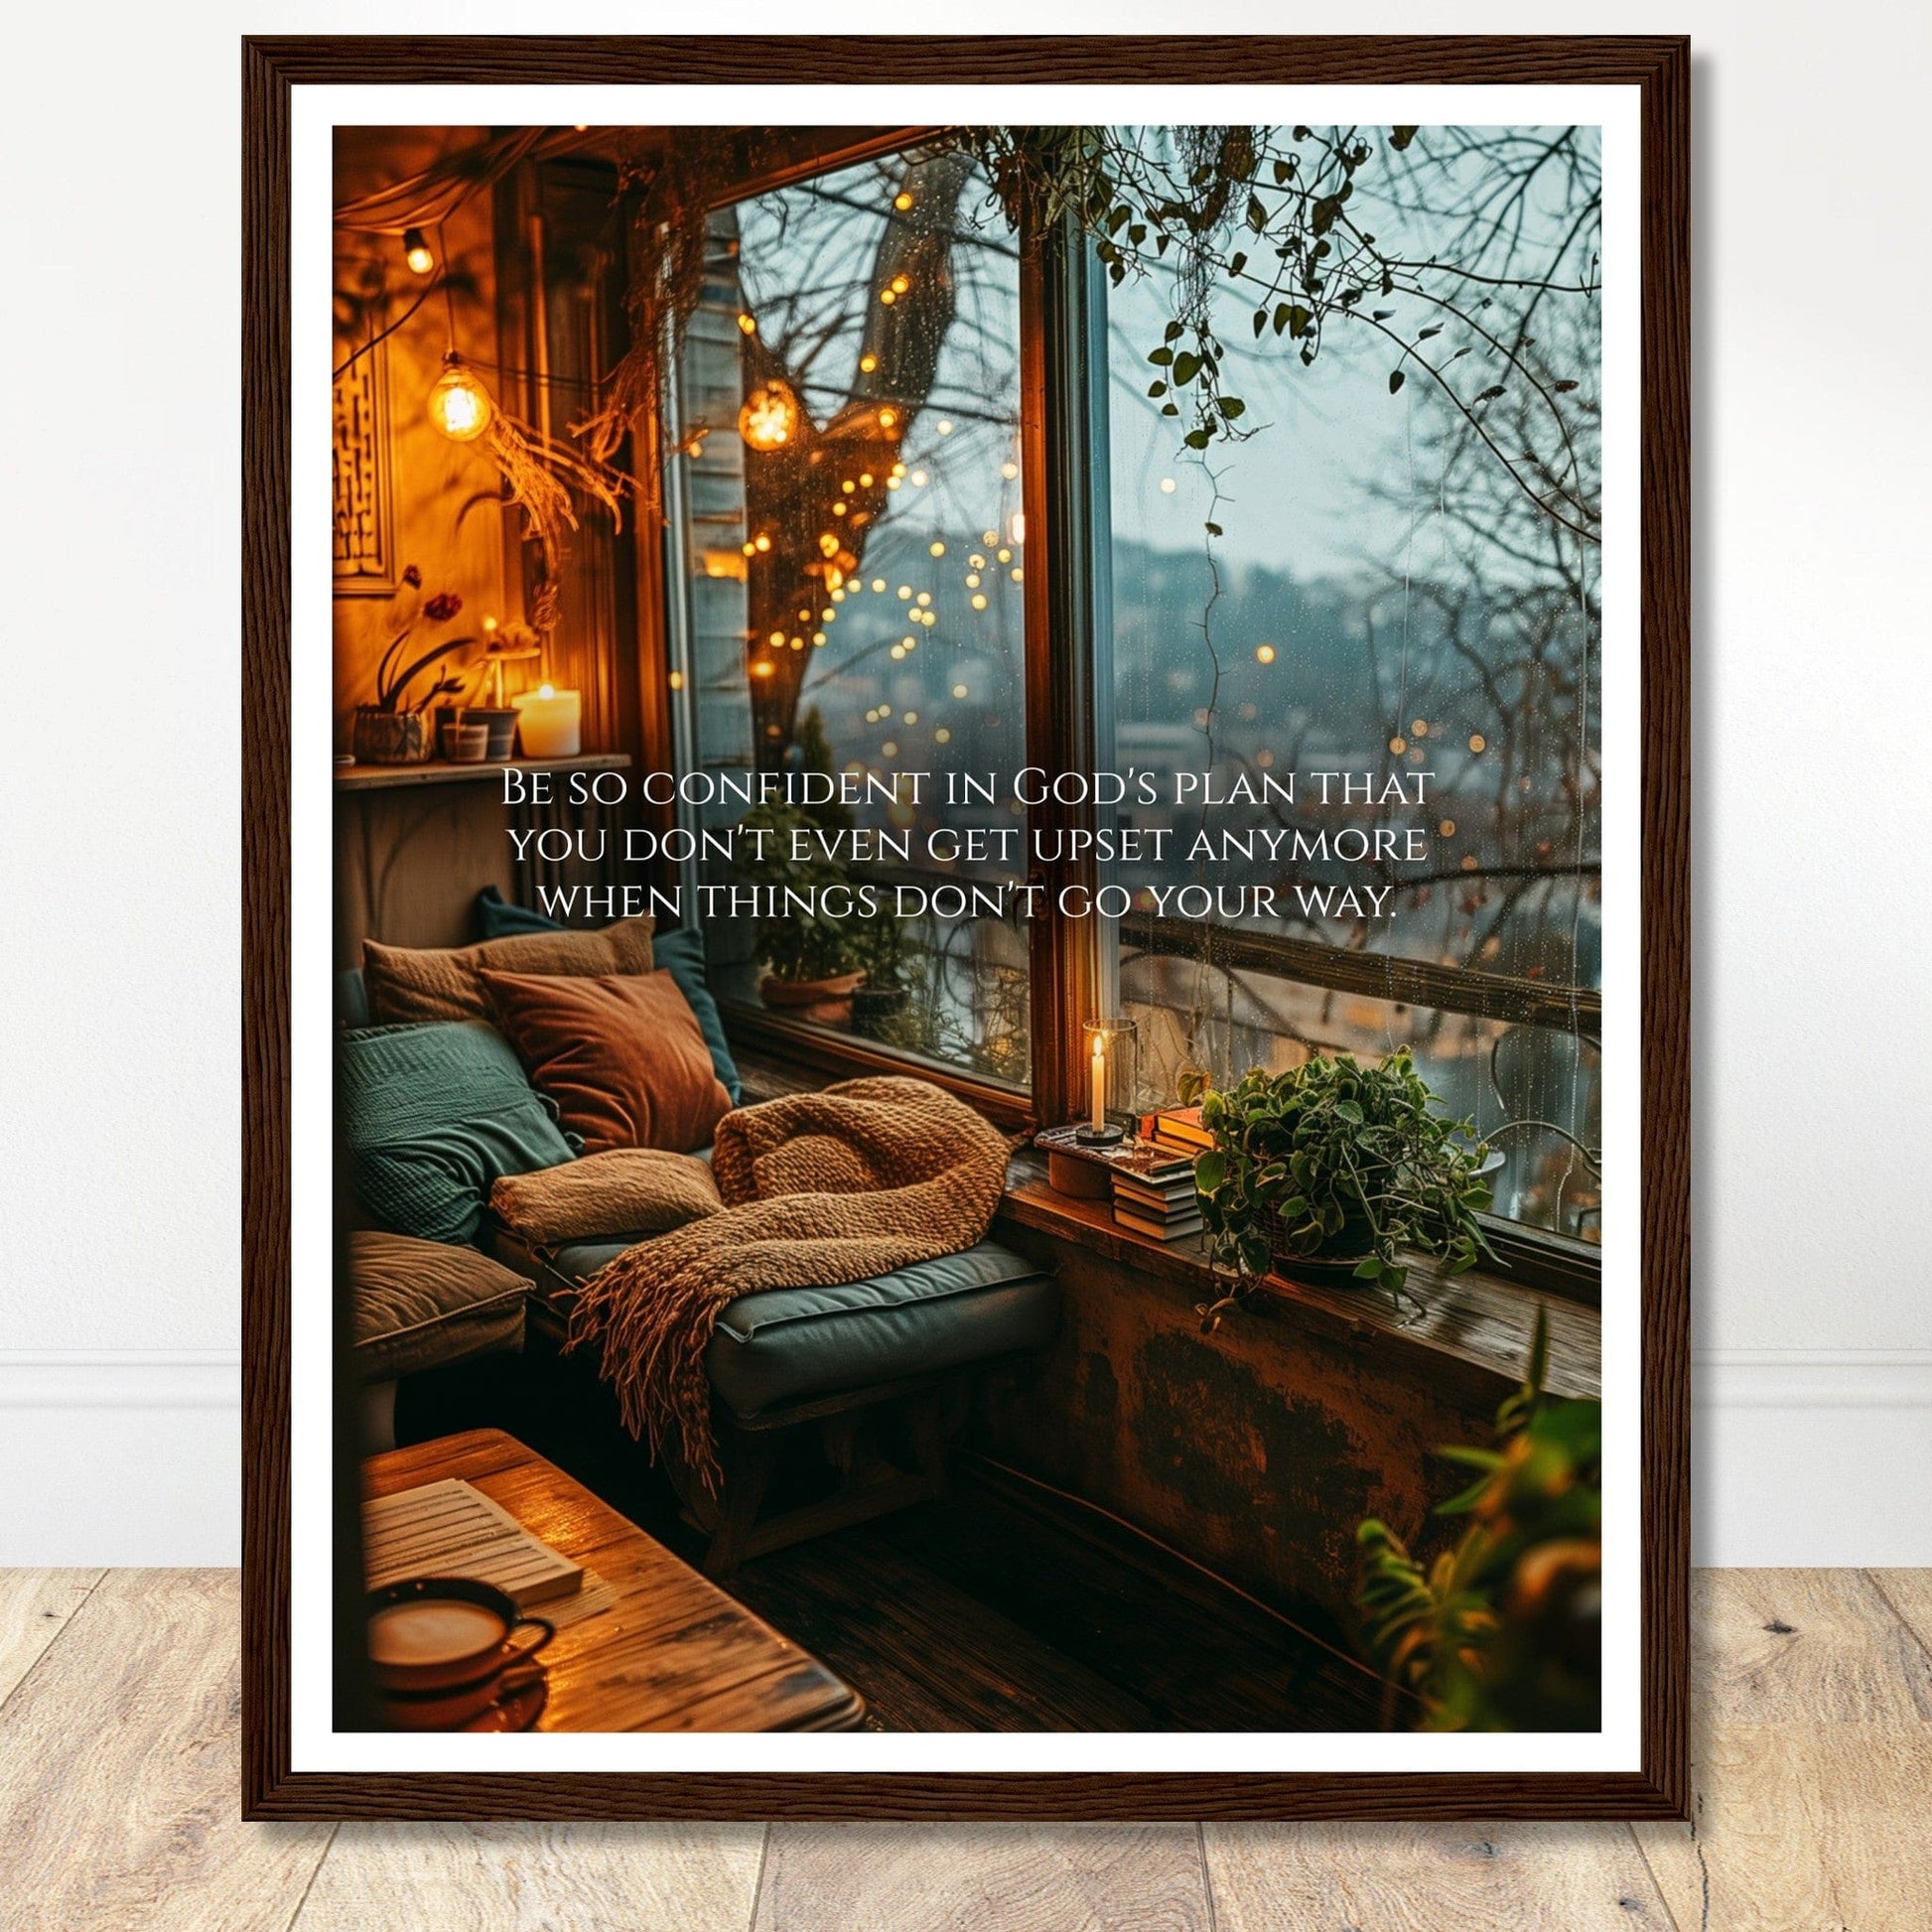 Coffee With My Father Print Material 40x50 cm / 16x20″ / Premium Matte Paper Wooden Framed Poster / Dark wood frame Premium Matte Paper Wooden Framed Poster